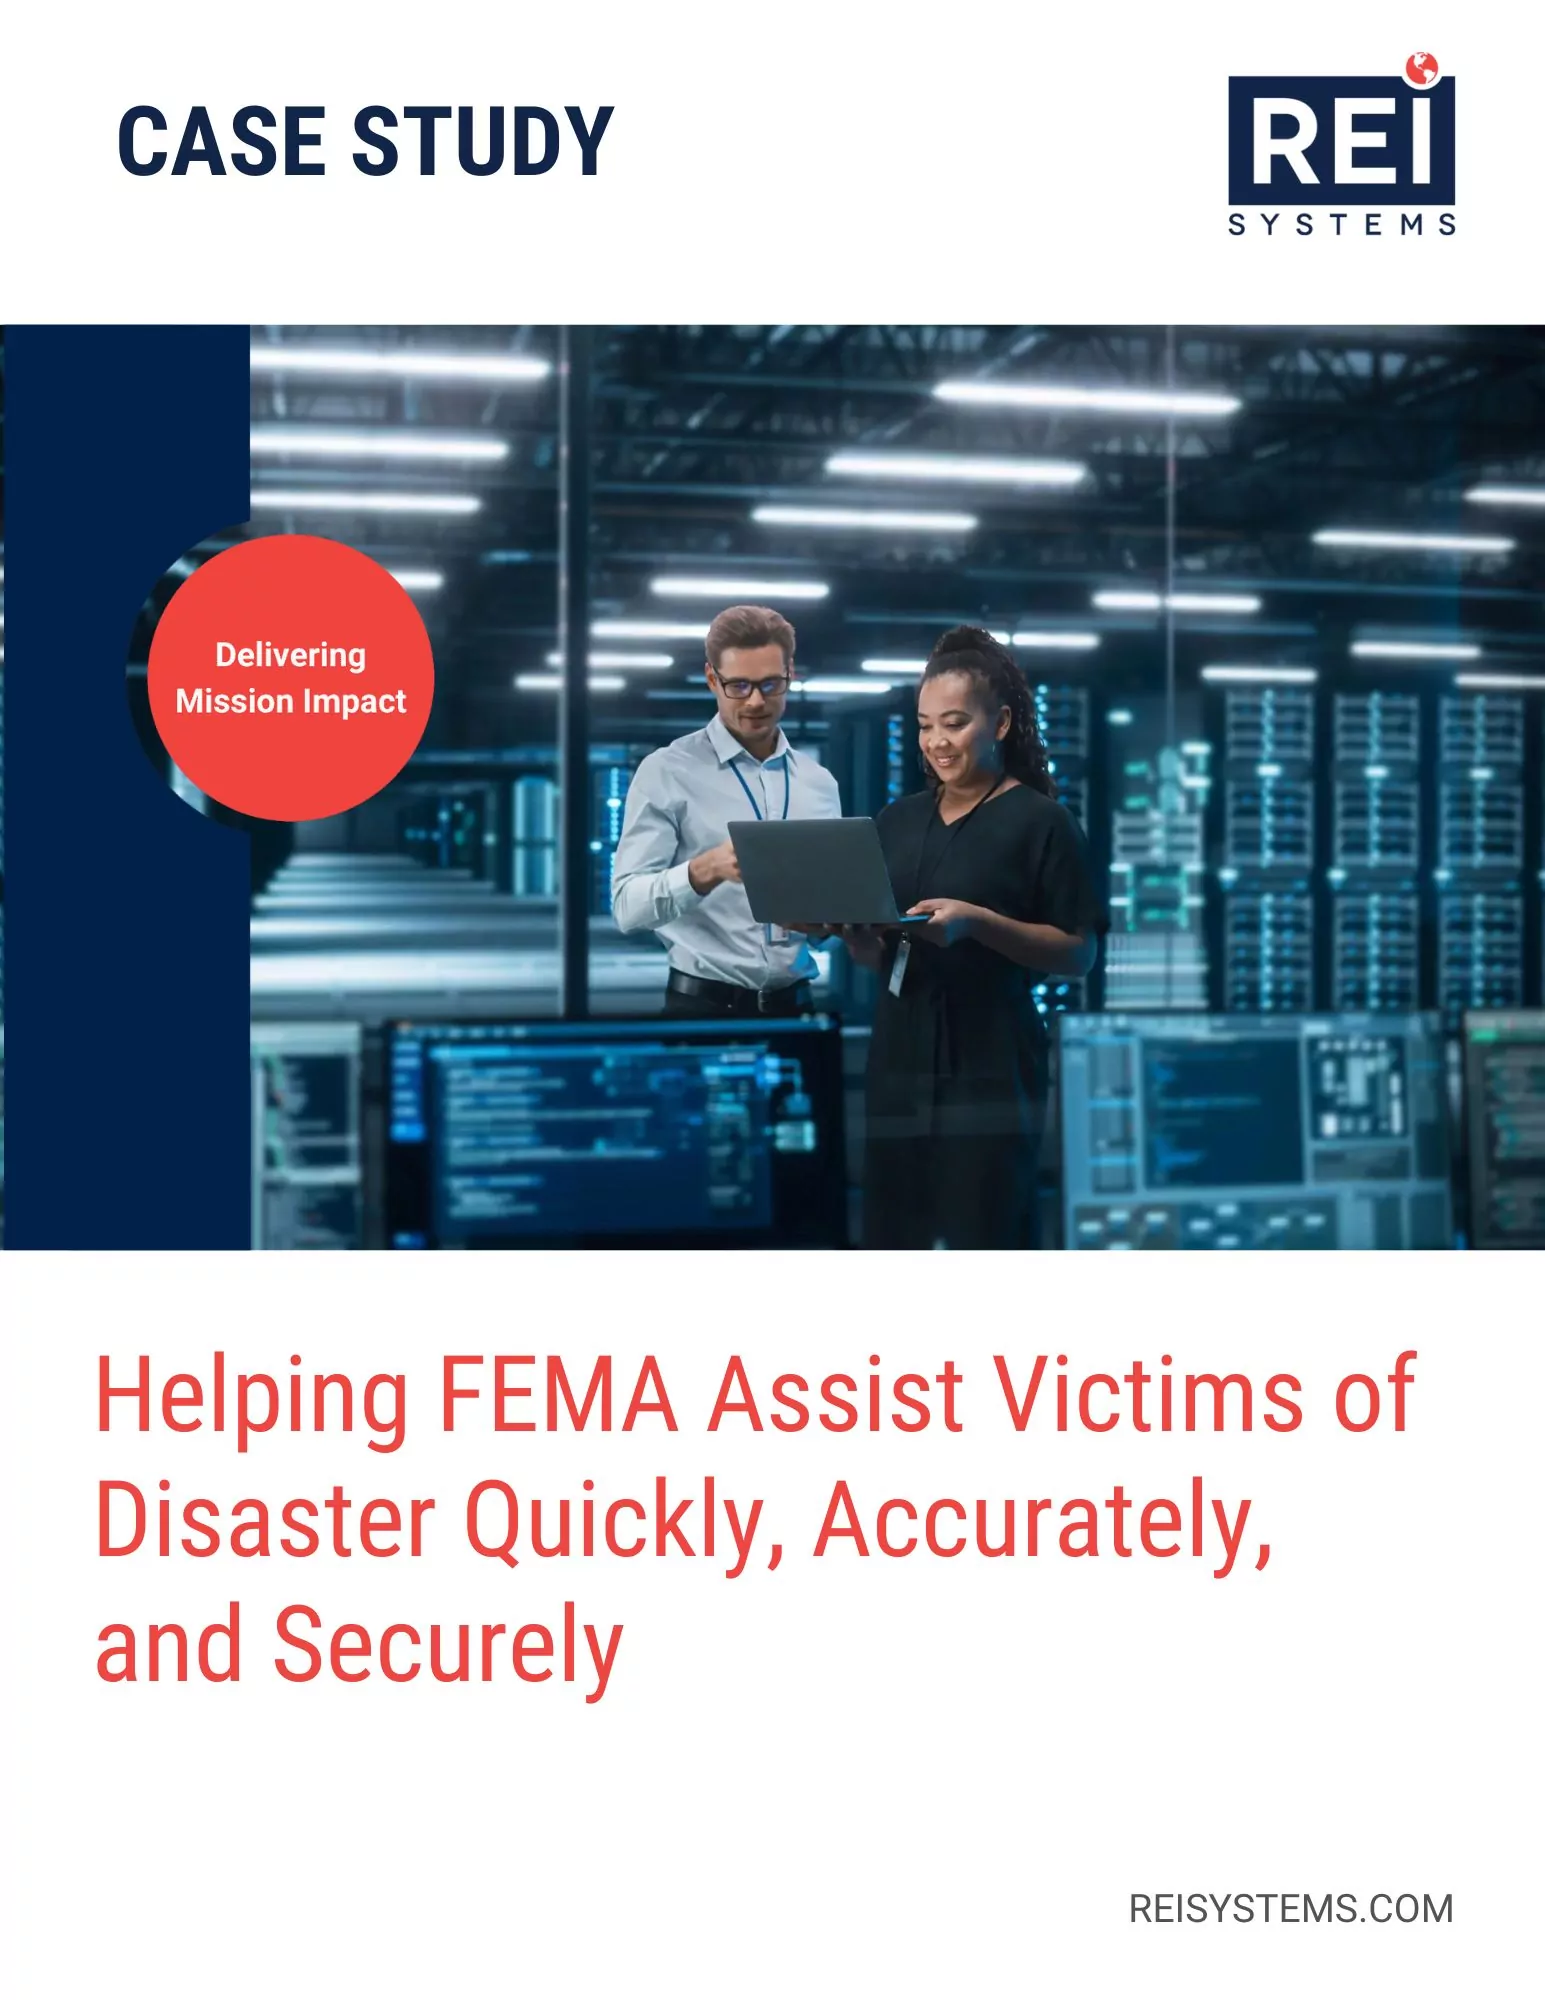 Helping FEMA Assist Victims of Disaster Quickly, Accurately, and Securely